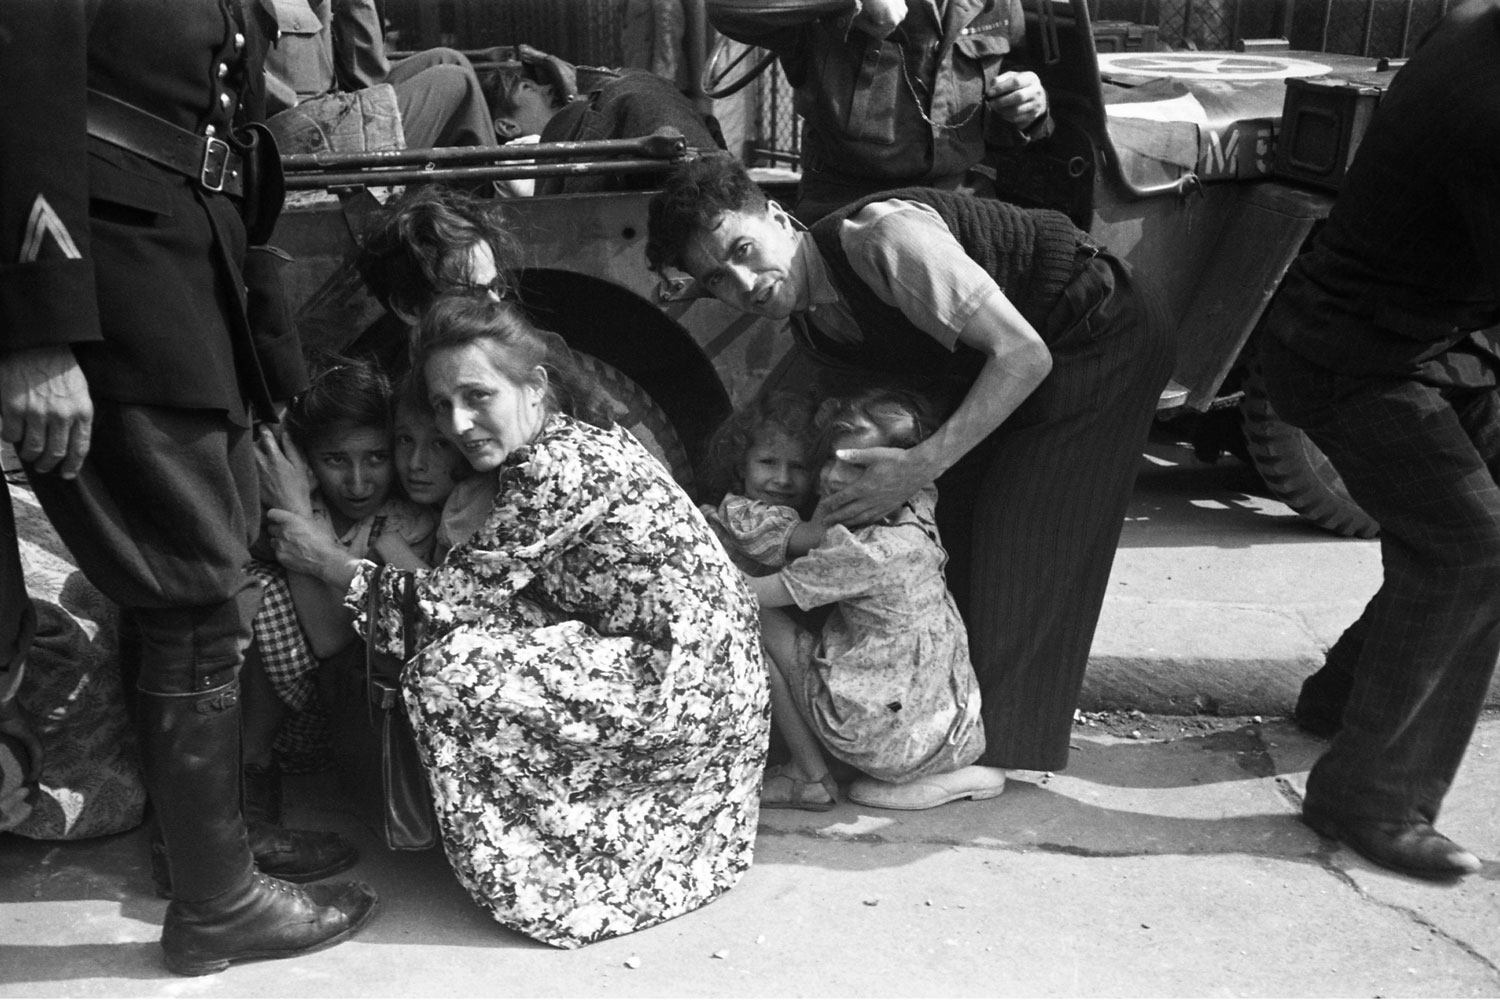 A family seeks safety beside a Jeep as French Resistance fighters and Free French troops try to take out a German sniper during the Liberation of Paris on August 25, 1944.